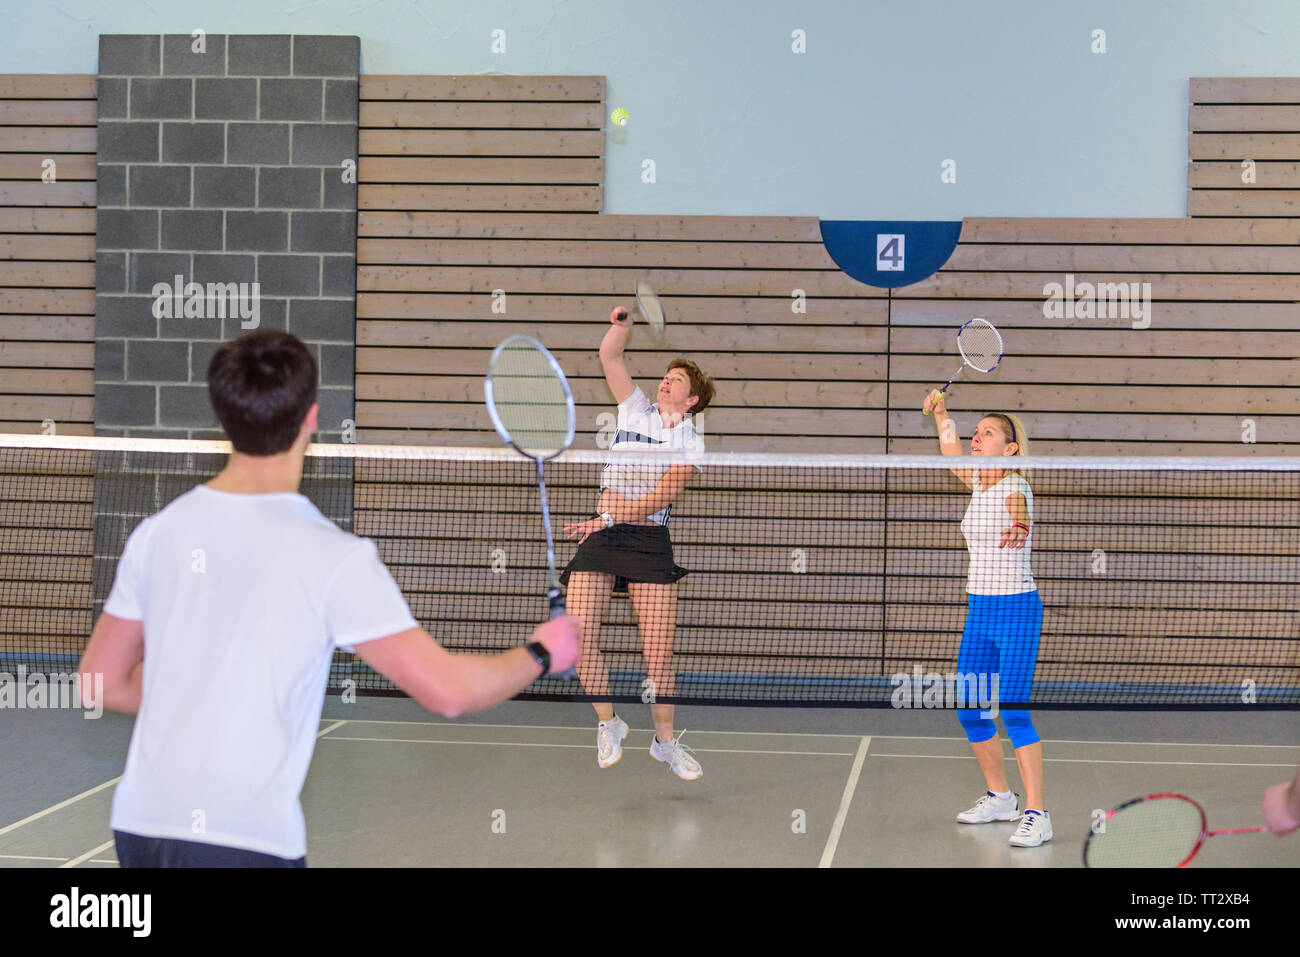 Badminton game scene in sports hall, a lot of effort and commitment during an intense game Stock Photo